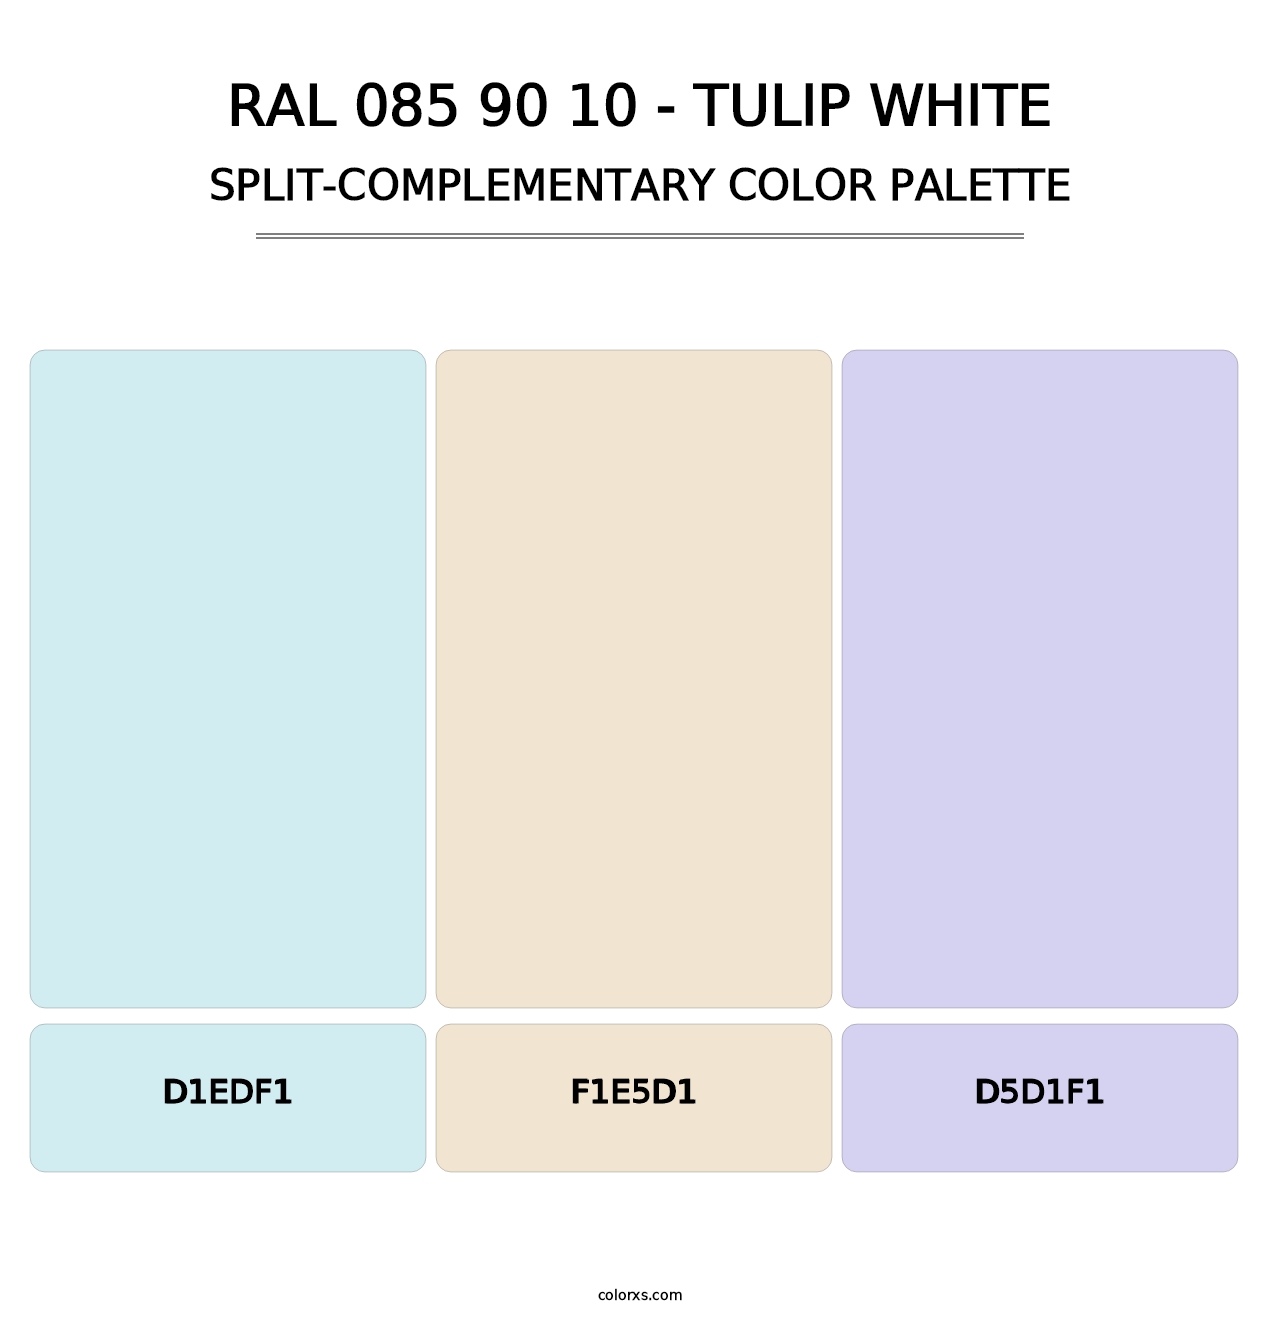 RAL 085 90 10 - Tulip White - Split-Complementary Color Palette